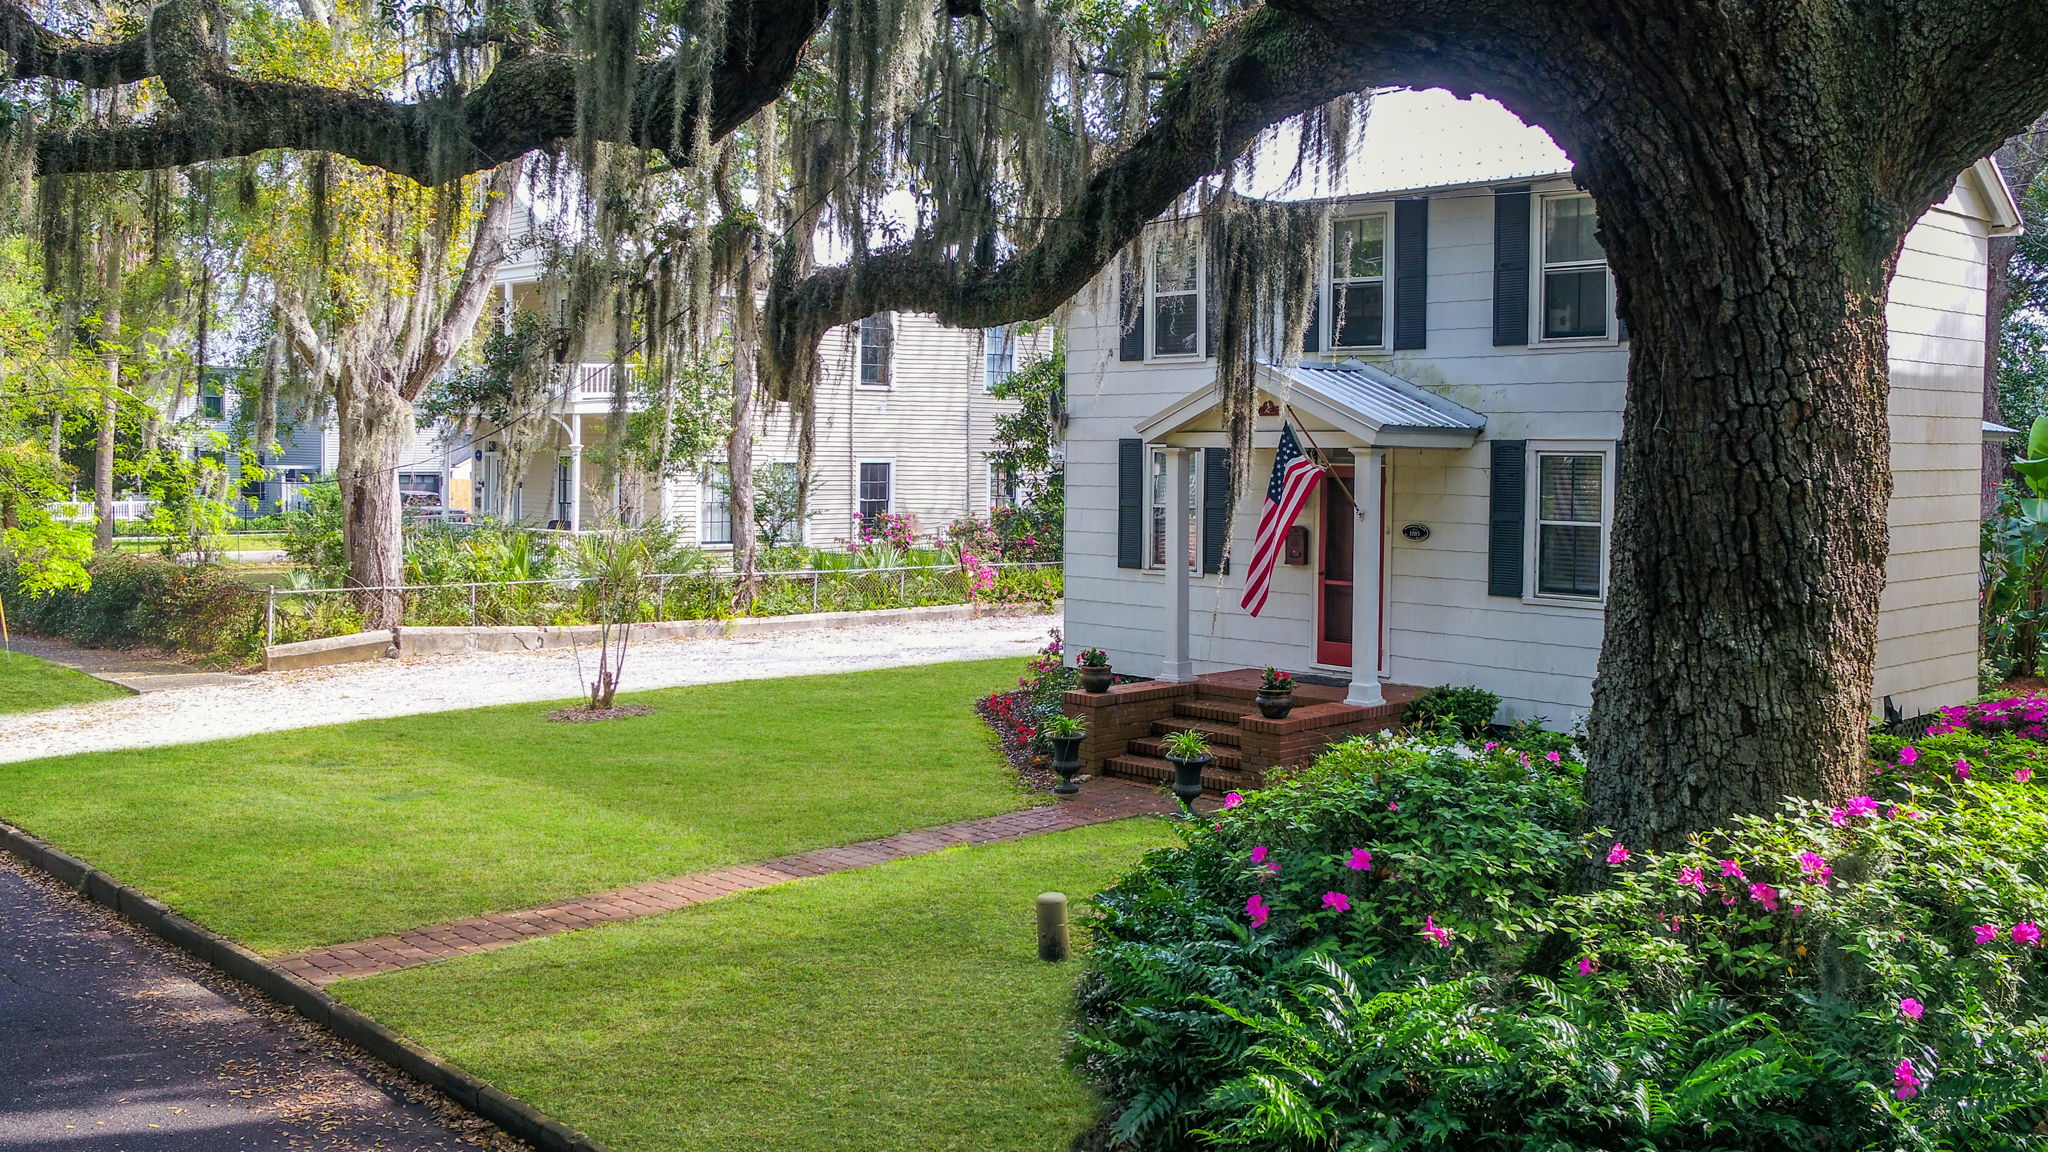 The property is graced by one of Fernandina's Heritage Trees, recognized for its age and historical significance